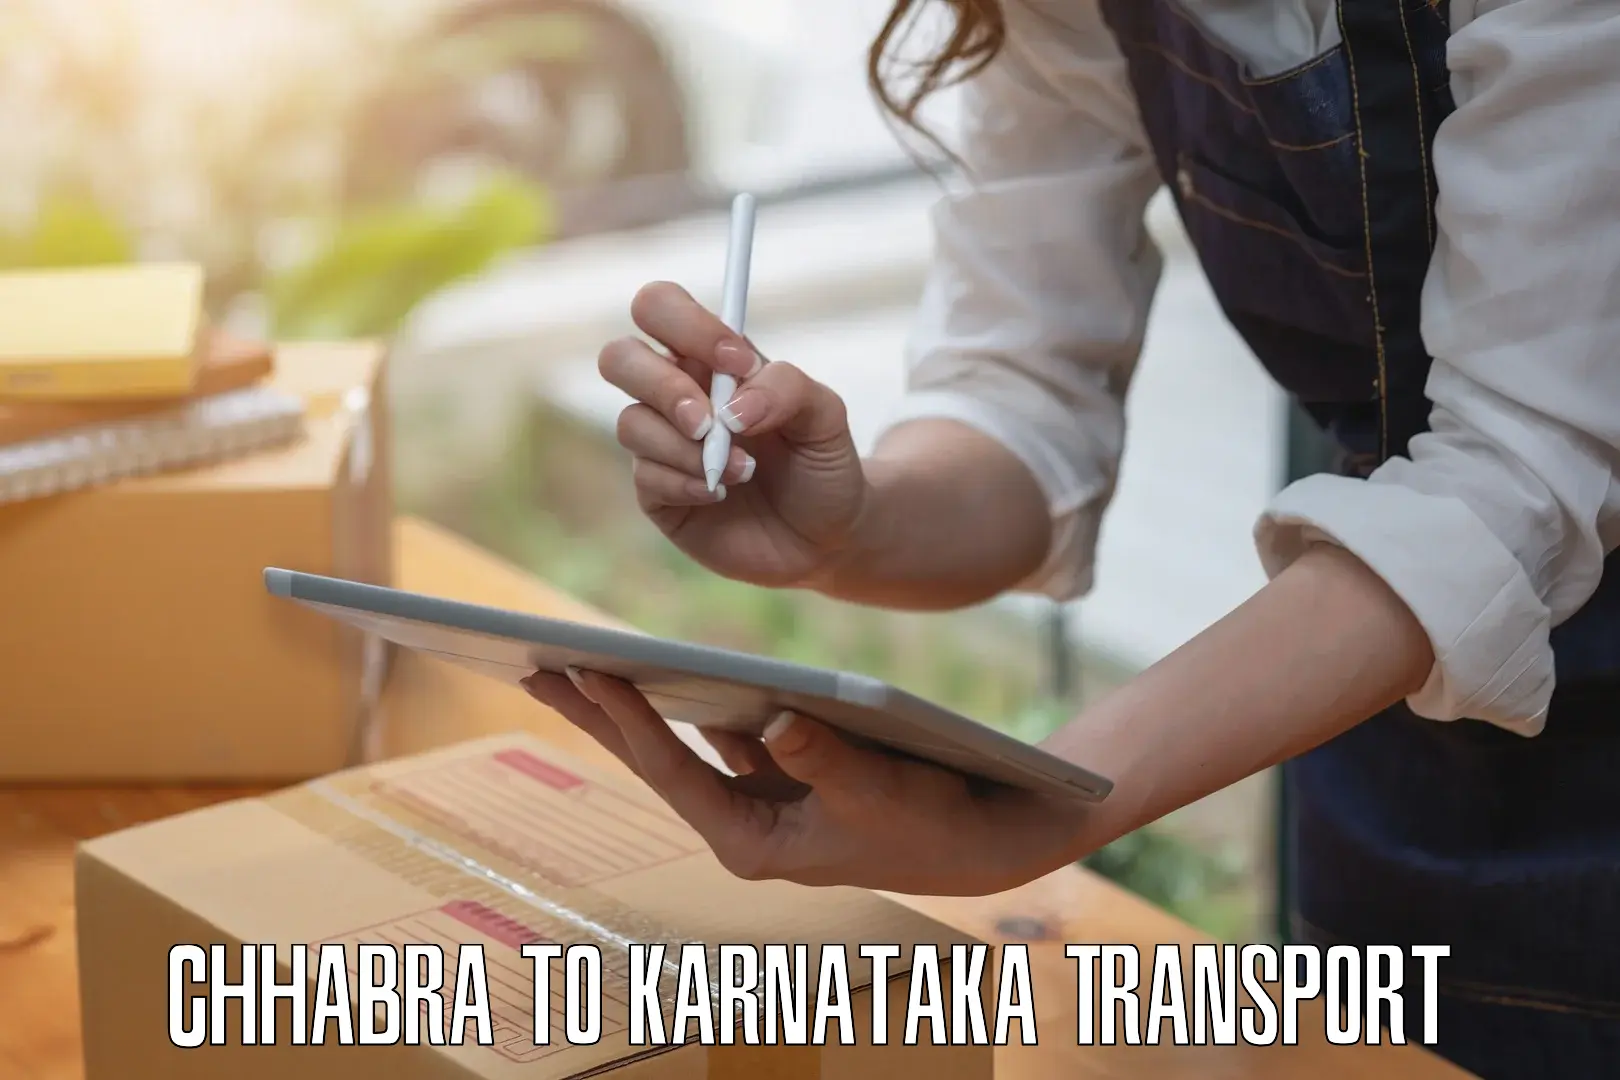 All India transport service in Chhabra to Bangalore